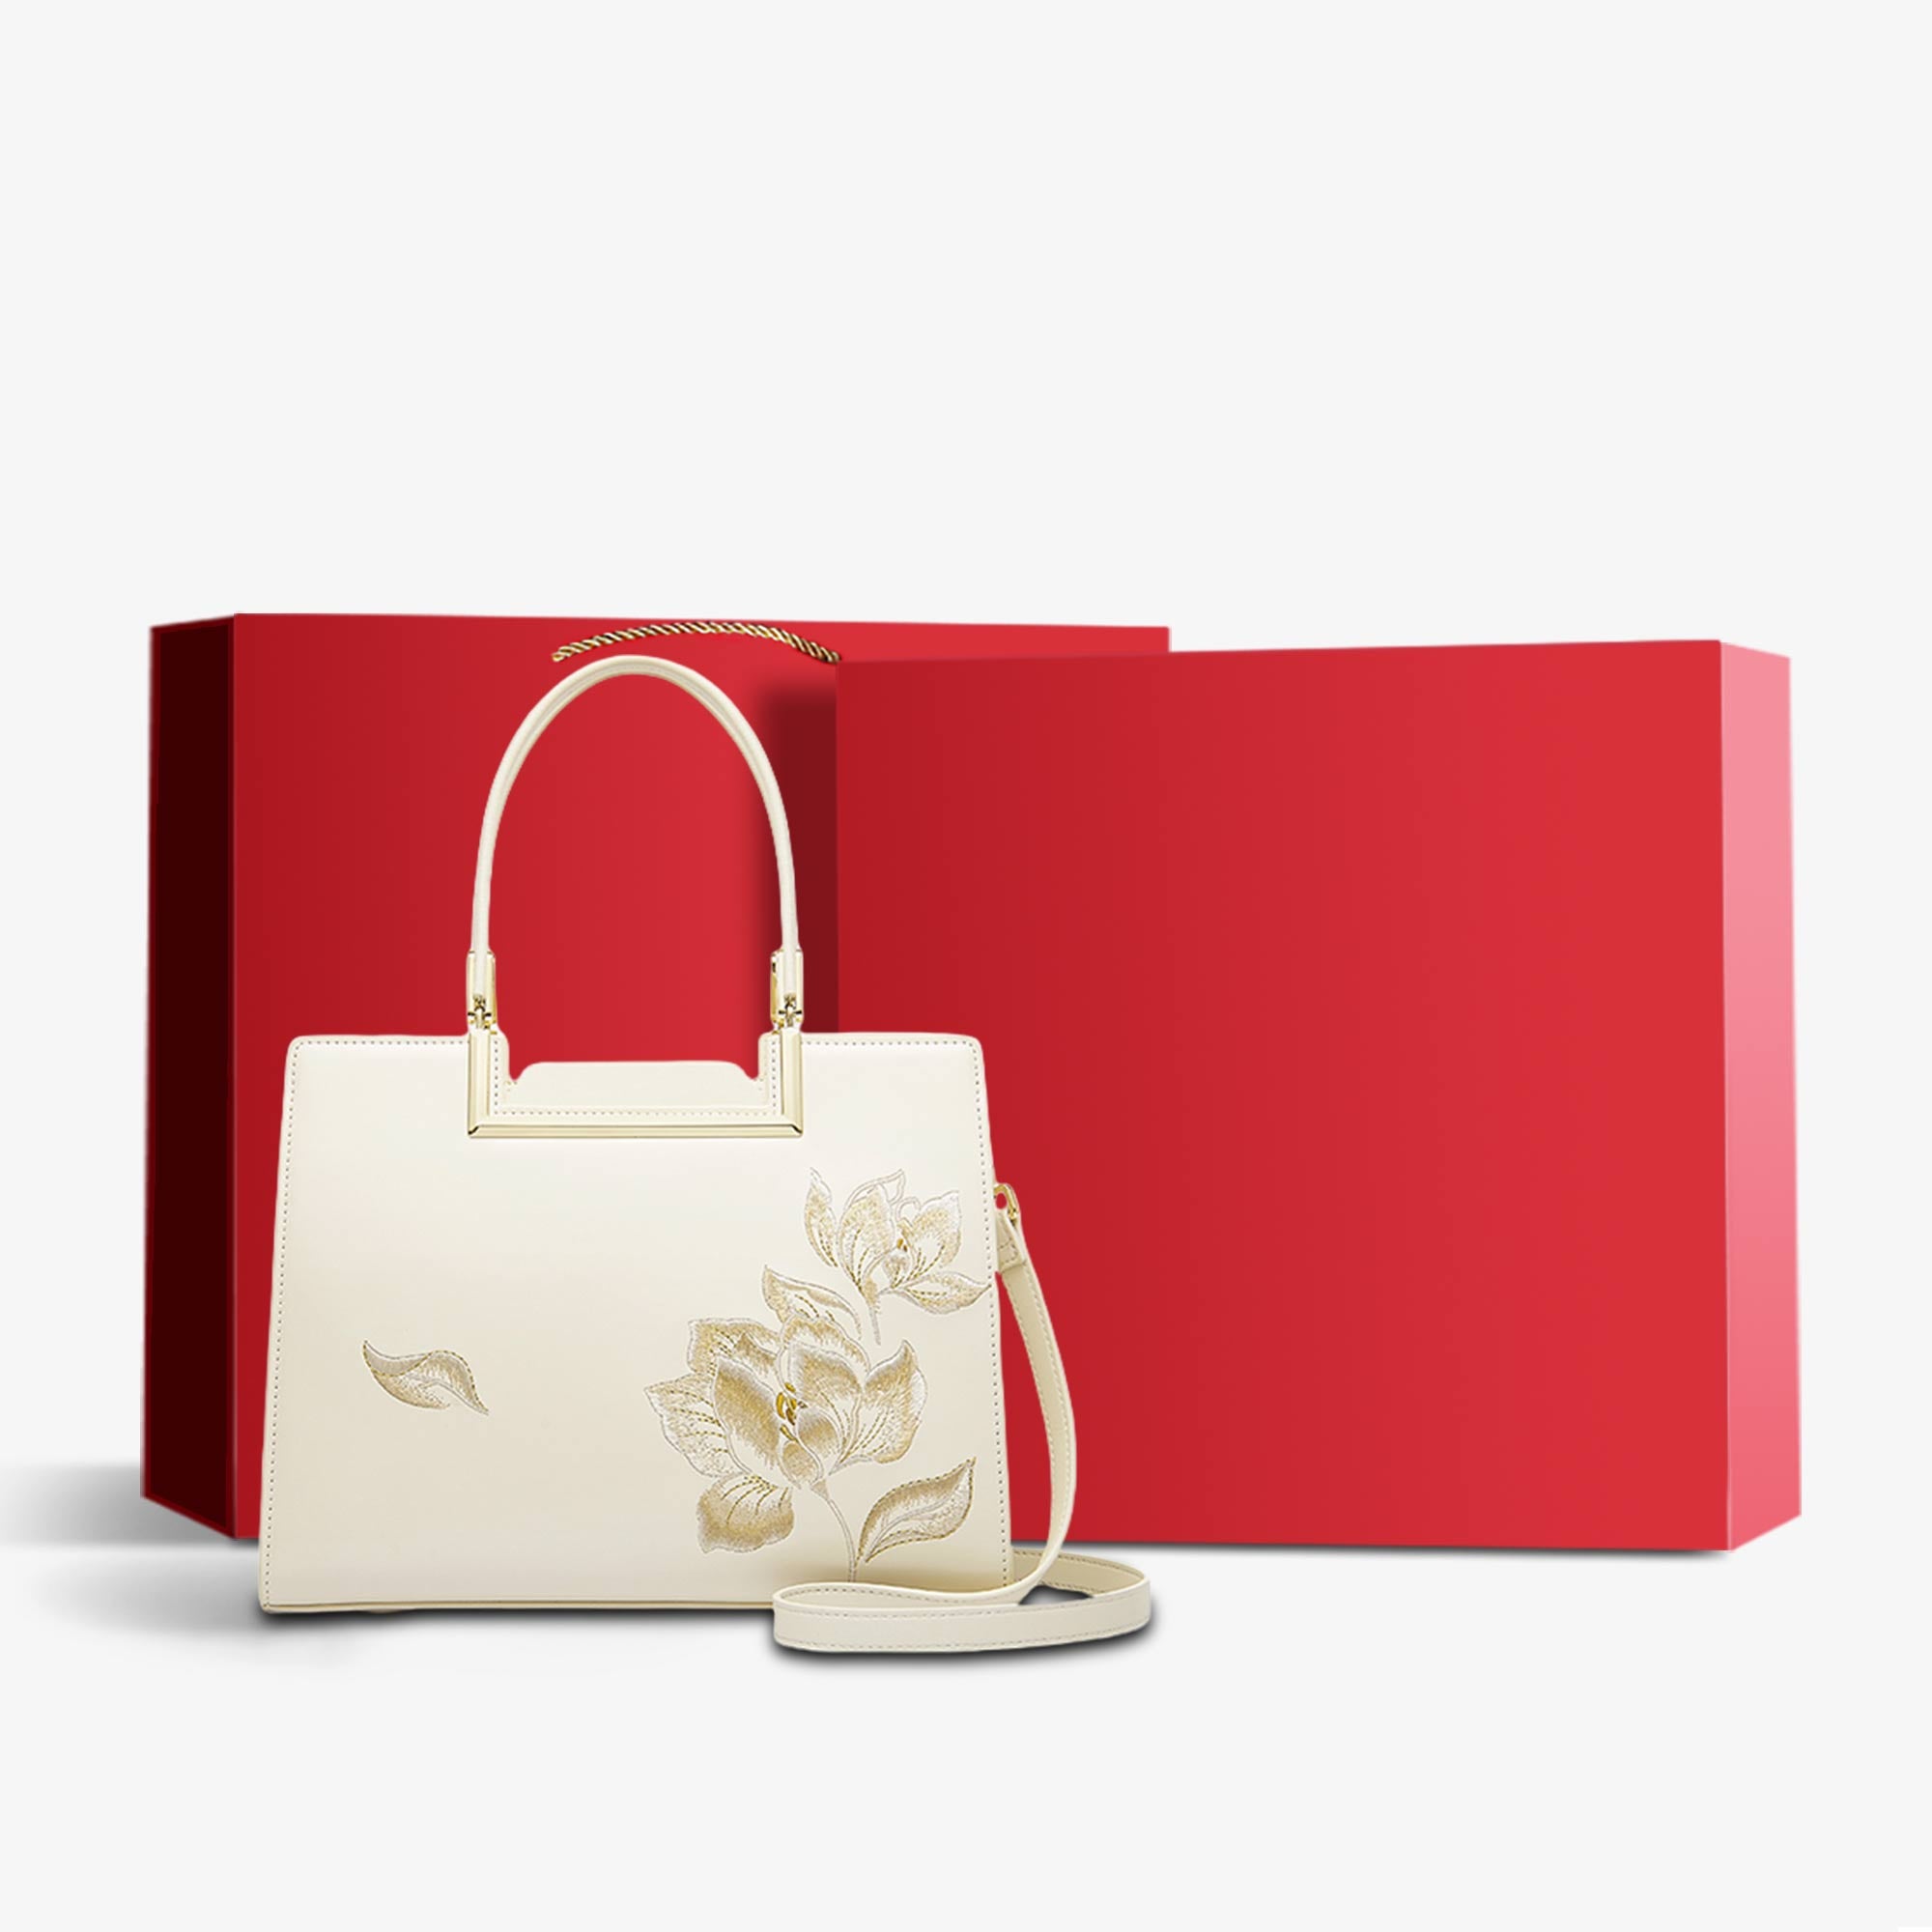 Embroidery Leather Magnolia Women's Handbag-Tote Bag-SinoCultural-White-Bag with Gift Box-P120346-4-g-SinoCultural